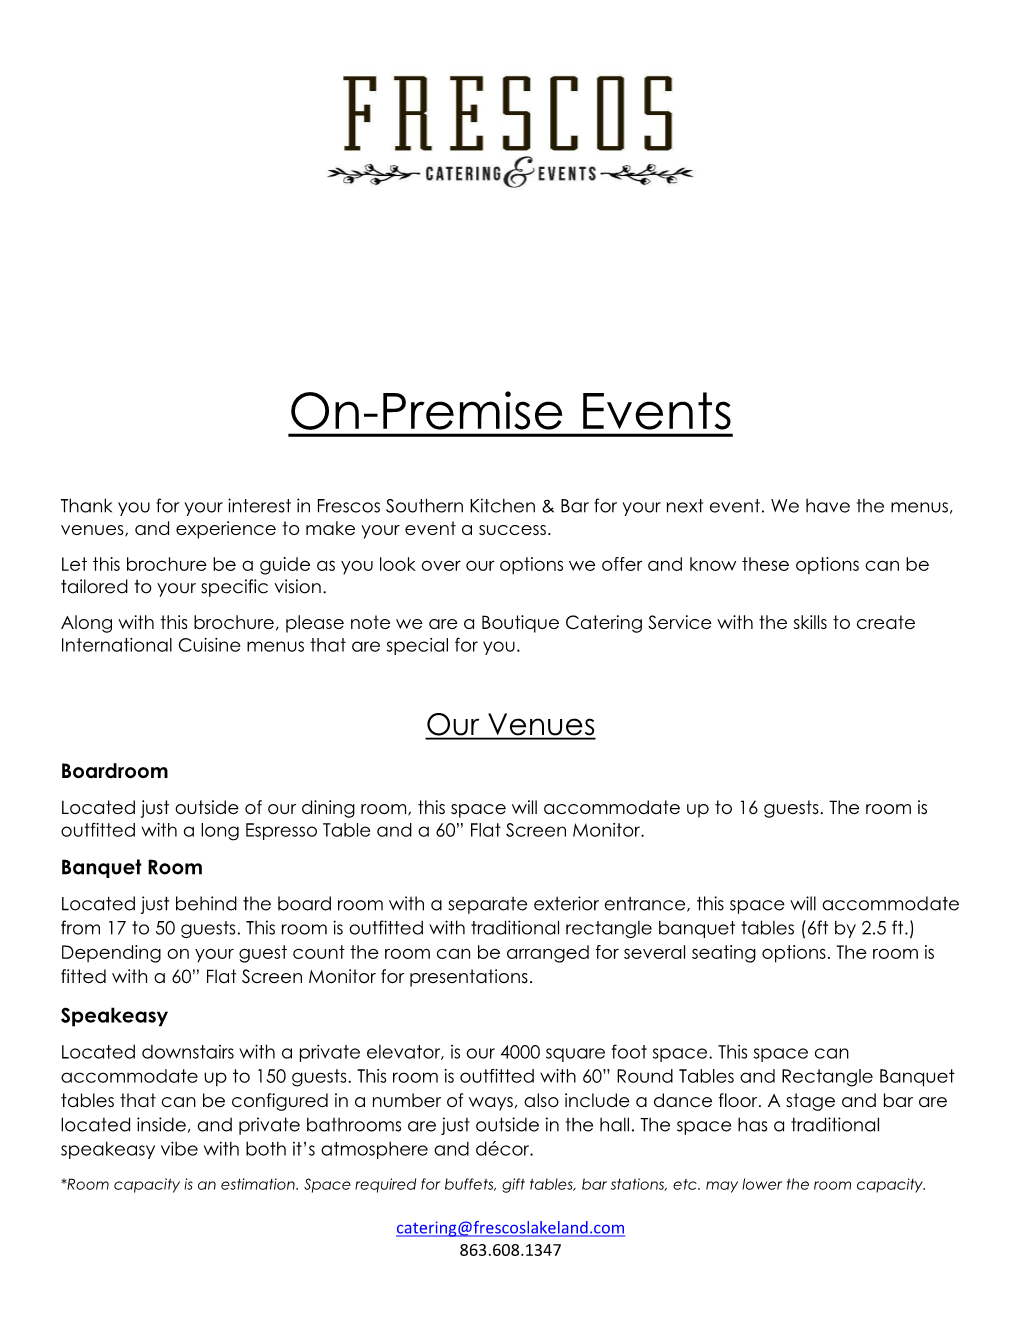 On-Premise Events